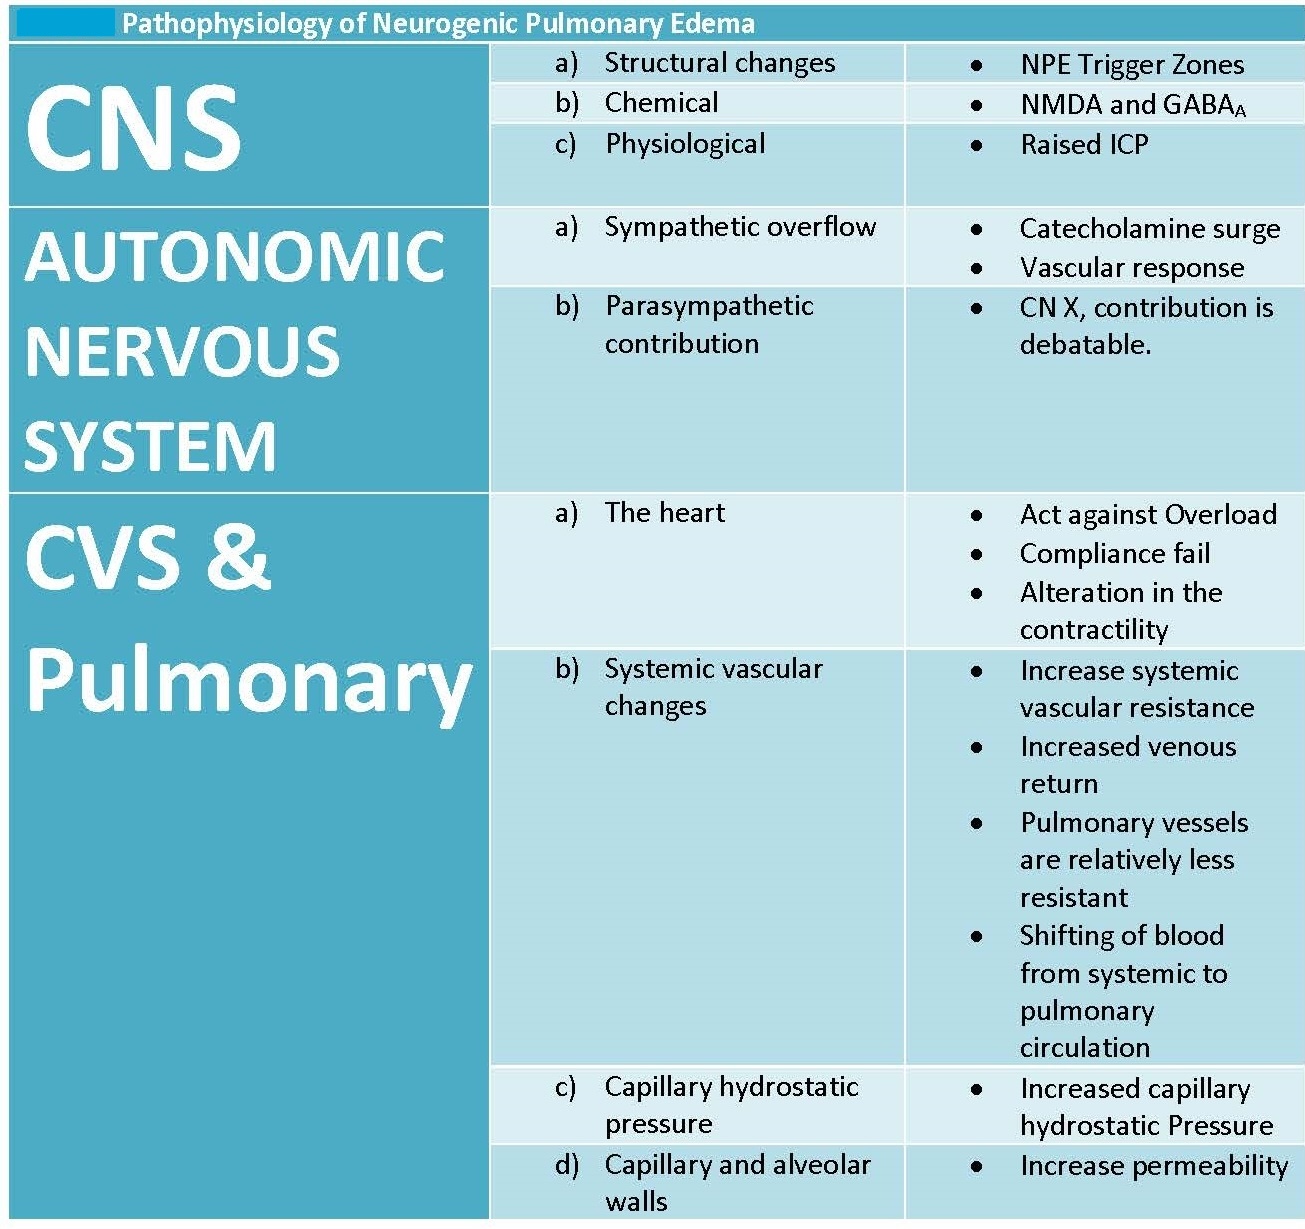 Table 1 Key features in the Pathophysiology of Neurogenic Pulmonary Edema 